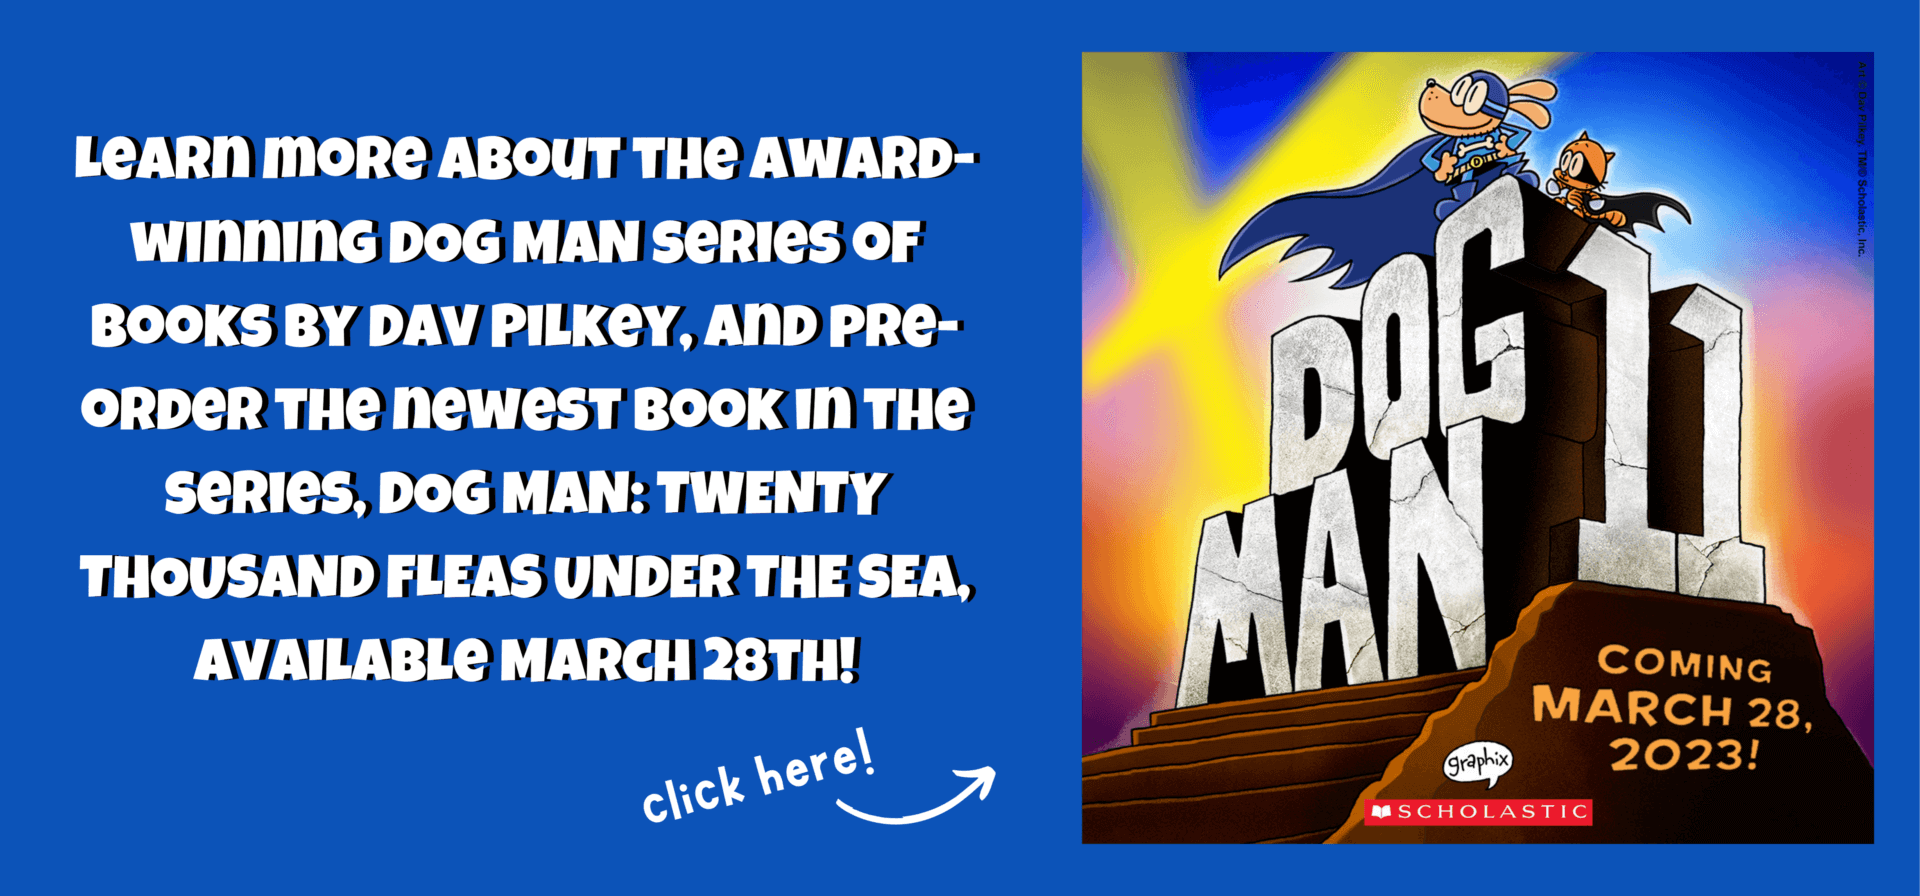 Learn more about the award-winning DOG MAN series of books by Dav Pilkey, and pre-order the newest book in the series, DOG MAN: TWENTY THOUSAND FLEAS UNDER THE SEA, available March 28th!